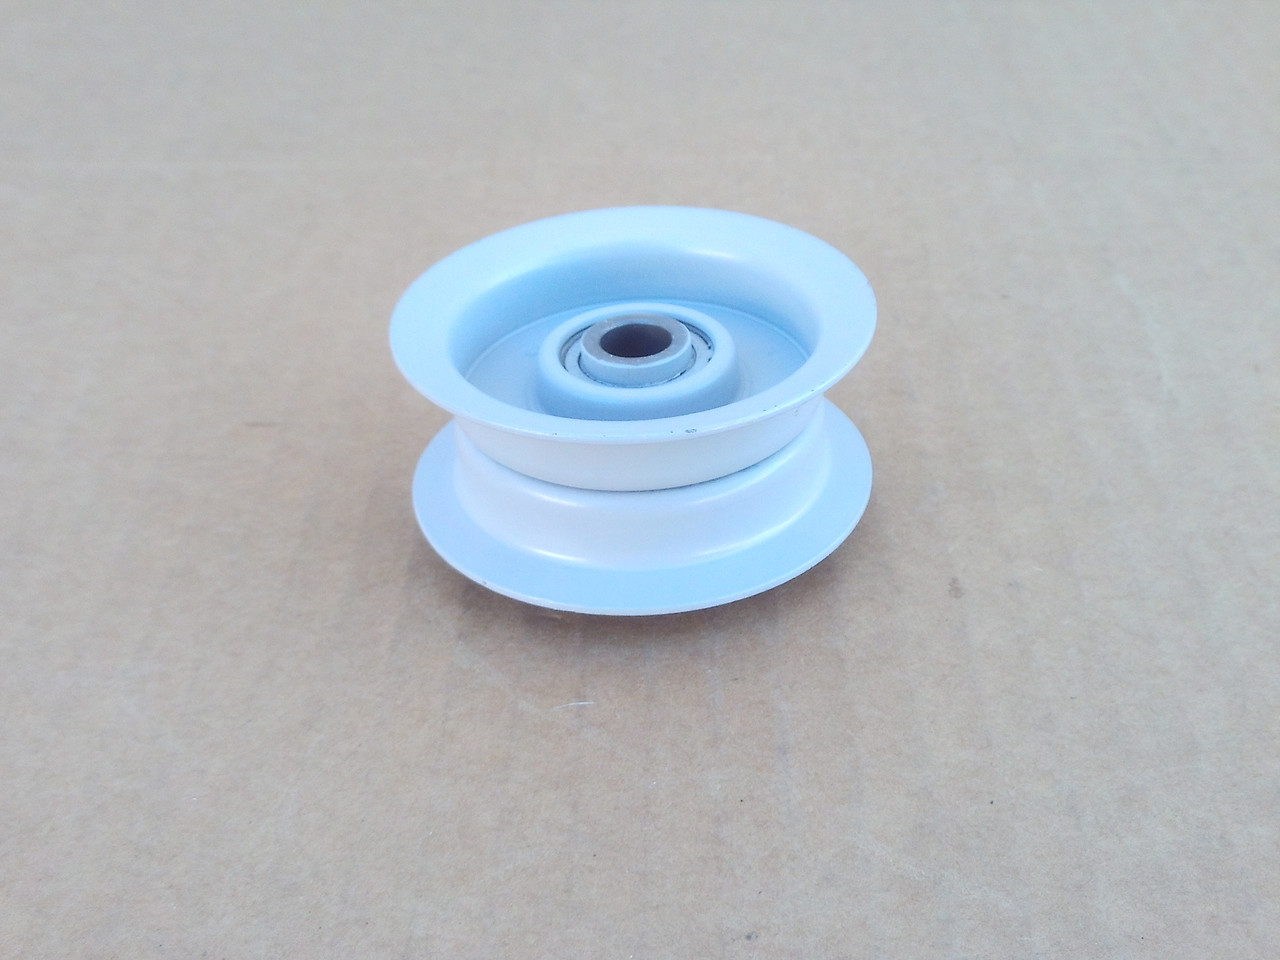 Idler Pulley for Gilson 31625 Height: 1", ID: 3/8", OD: 2-1/2"